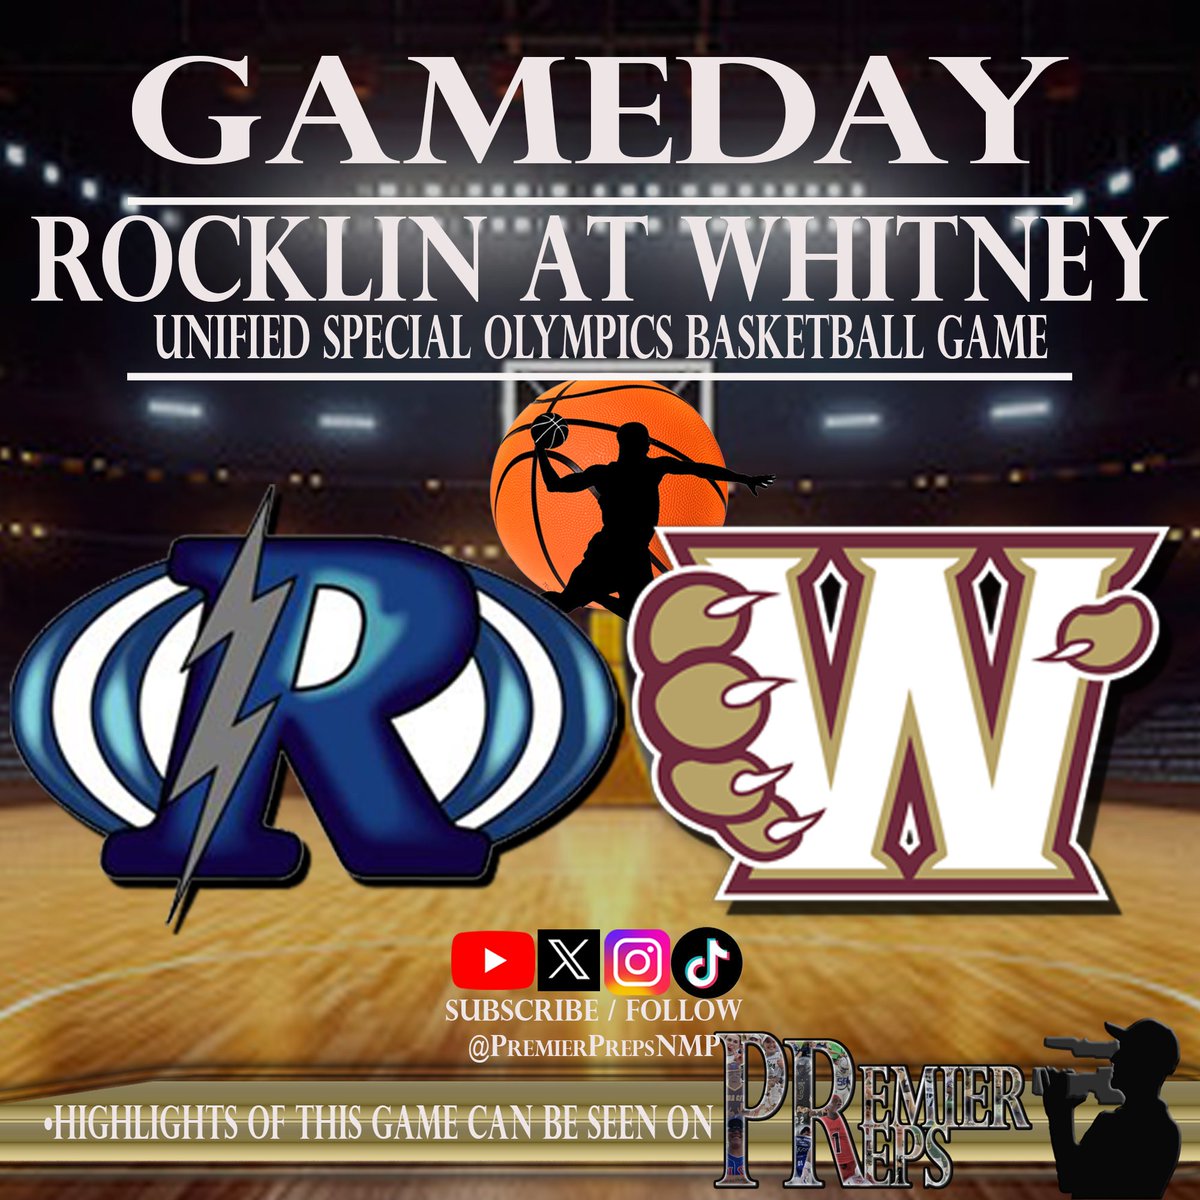 Very excited for what promises to be an AMAZING event tonight in Rocklin! @WhitneyUnited is hosting the annual Rocklin-Whitney Unified Sports🏀Game, a Special Olympics event that always produces smiles! I'll have highlights Sunday on Premier Preps! youtube.com/@PremierPreps